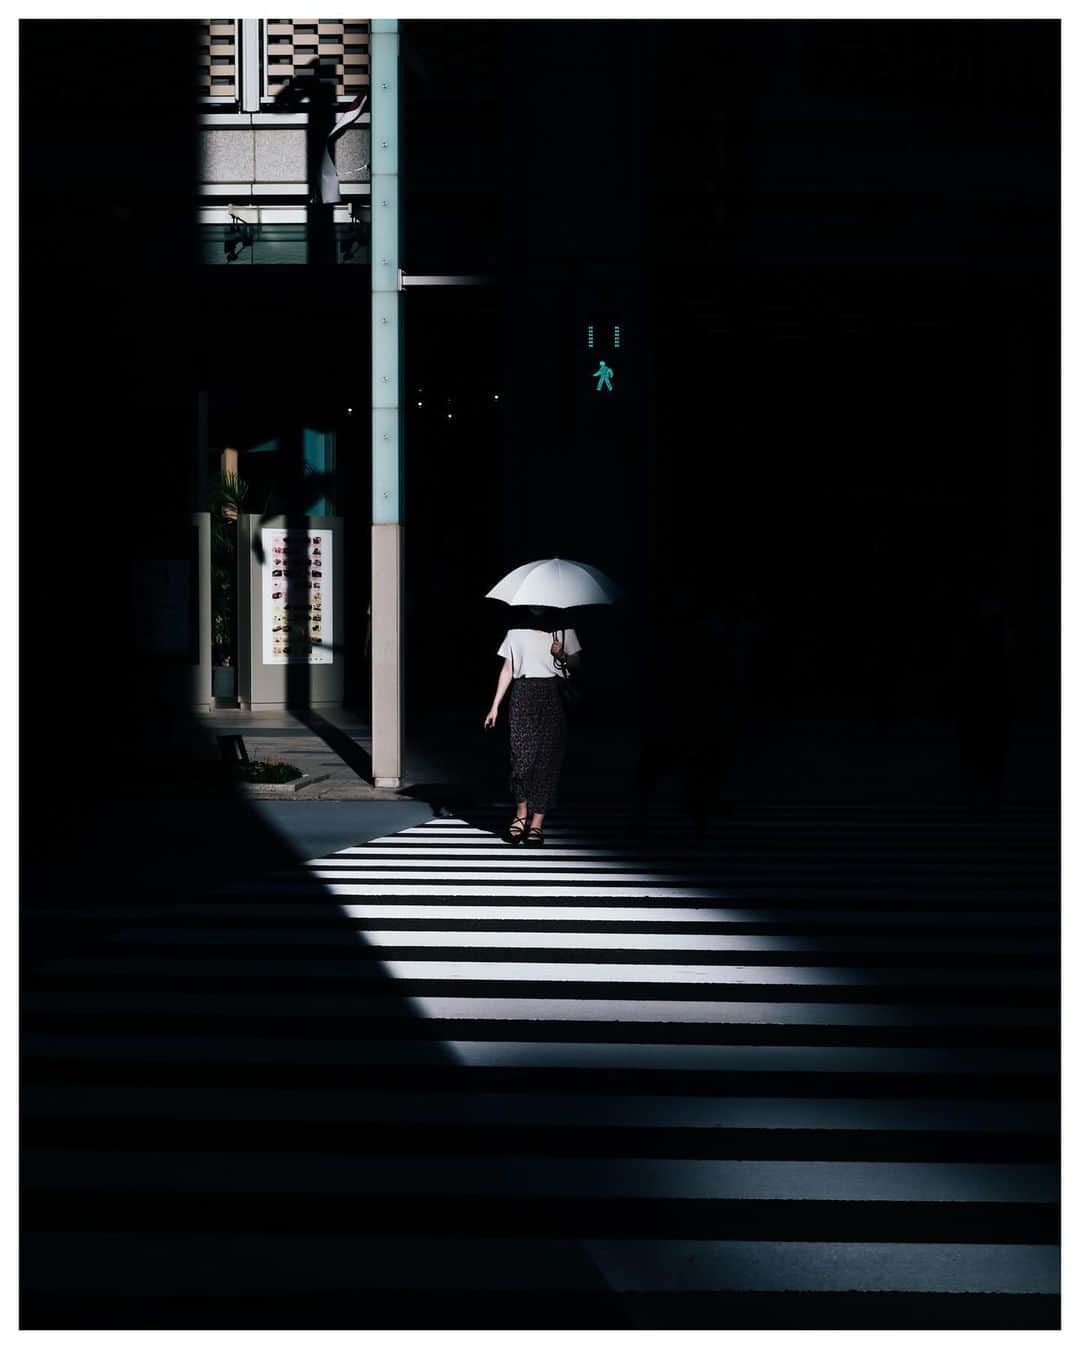 Takashi Yasuiのインスタグラム：「Tokyo 🔦 August 2021  📕My photo book - worldwide shipping daily - 🖥 Lightroom presets ▶▶Link in bio  #USETSU #USETSUpresets #TakashiYasui #SPiCollective #filmic_streets #ASPfeatures #photocinematica #STREETGRAMMERS #street_storytelling #bcncollective #ifyouleave #sublimestreet #streetfinder #timeless_streets #MadeWithLightroom #worldviewmag #hellofrom #reco_ig」